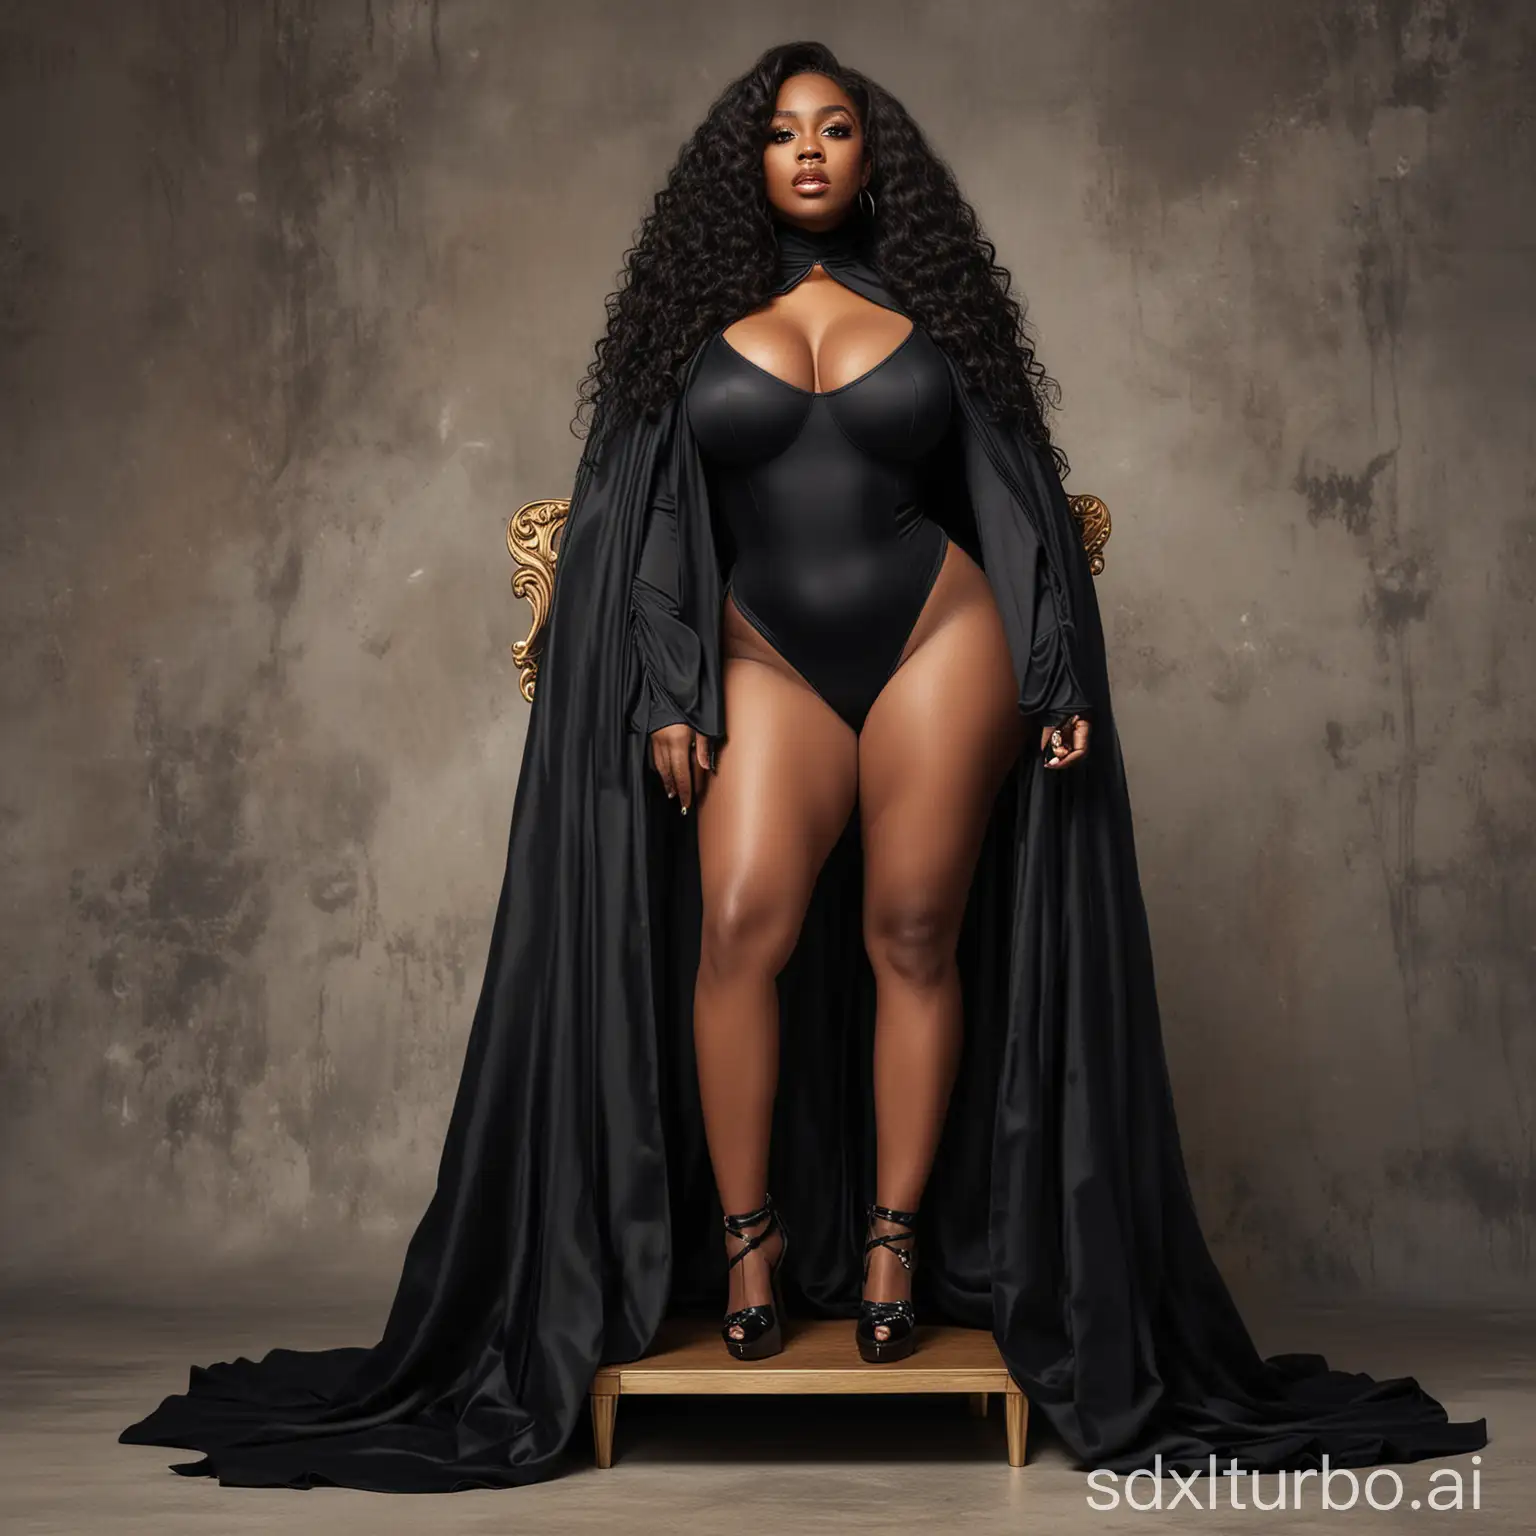 black woman, large breasts, long curvy hair, wears black cape with high collar, wears high heels, sitting on an elevated throne